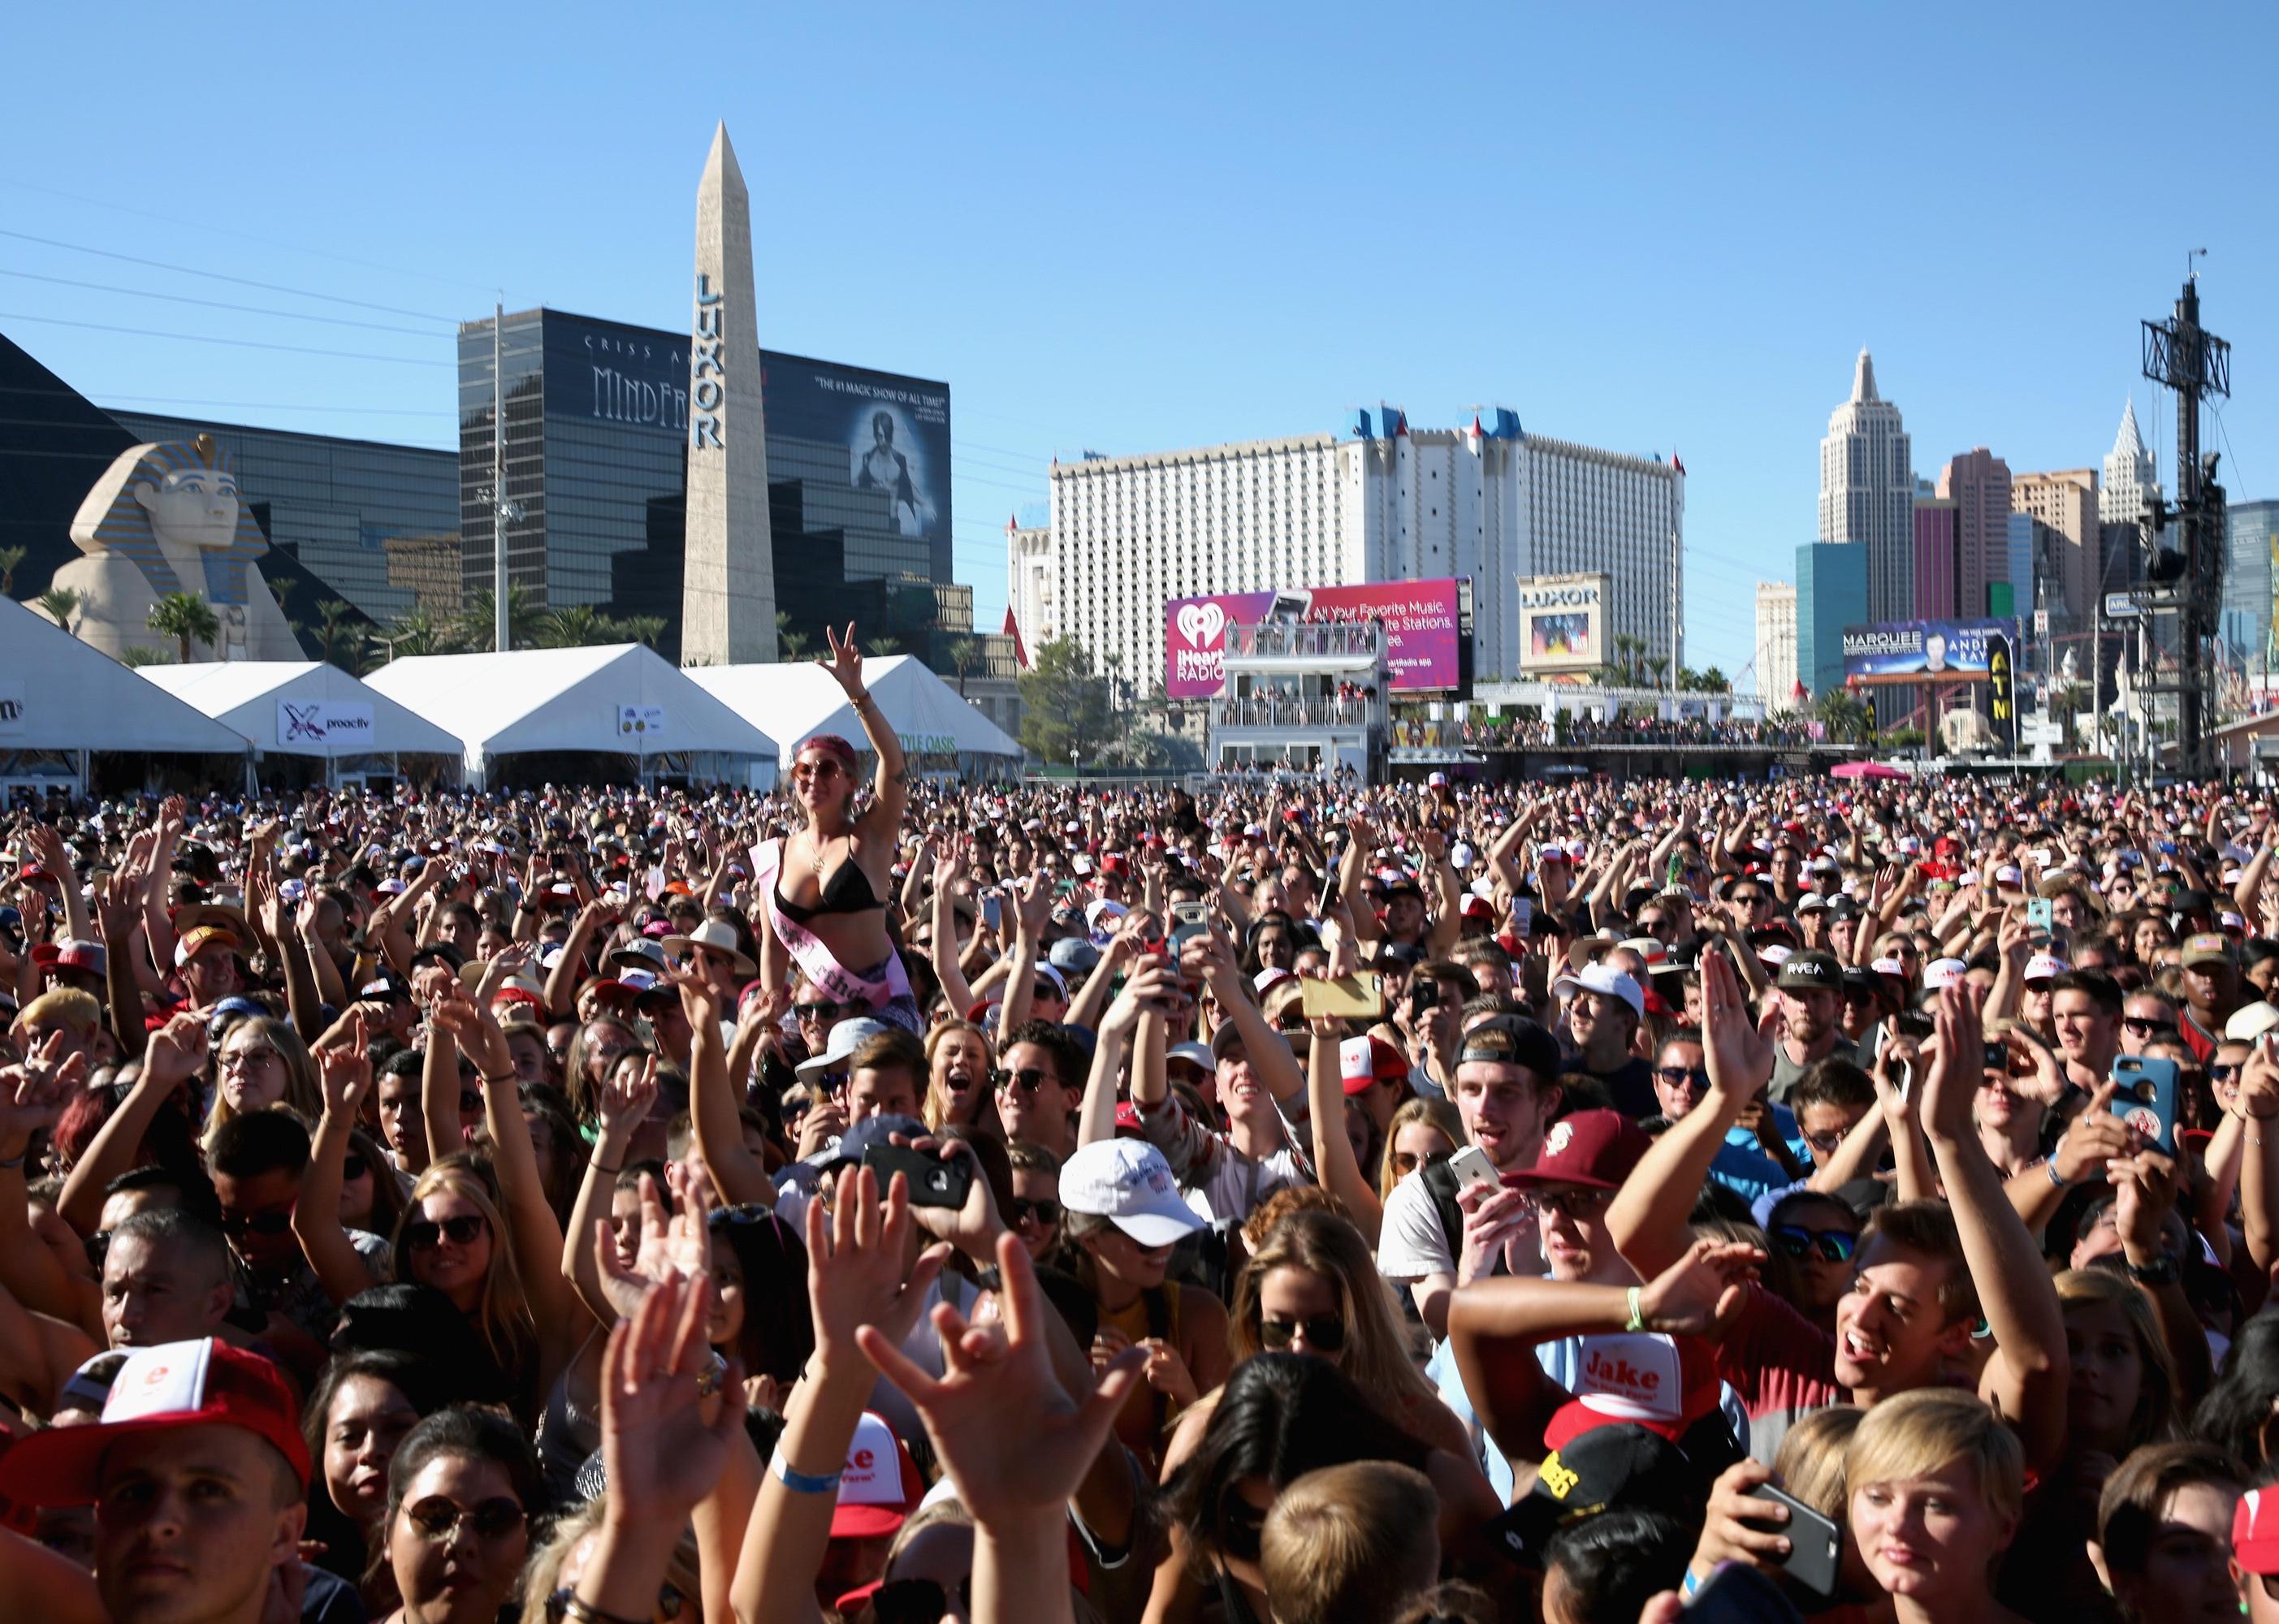 A view of the crowd during the Daytime Village at the iHeartRadio Music Festival.